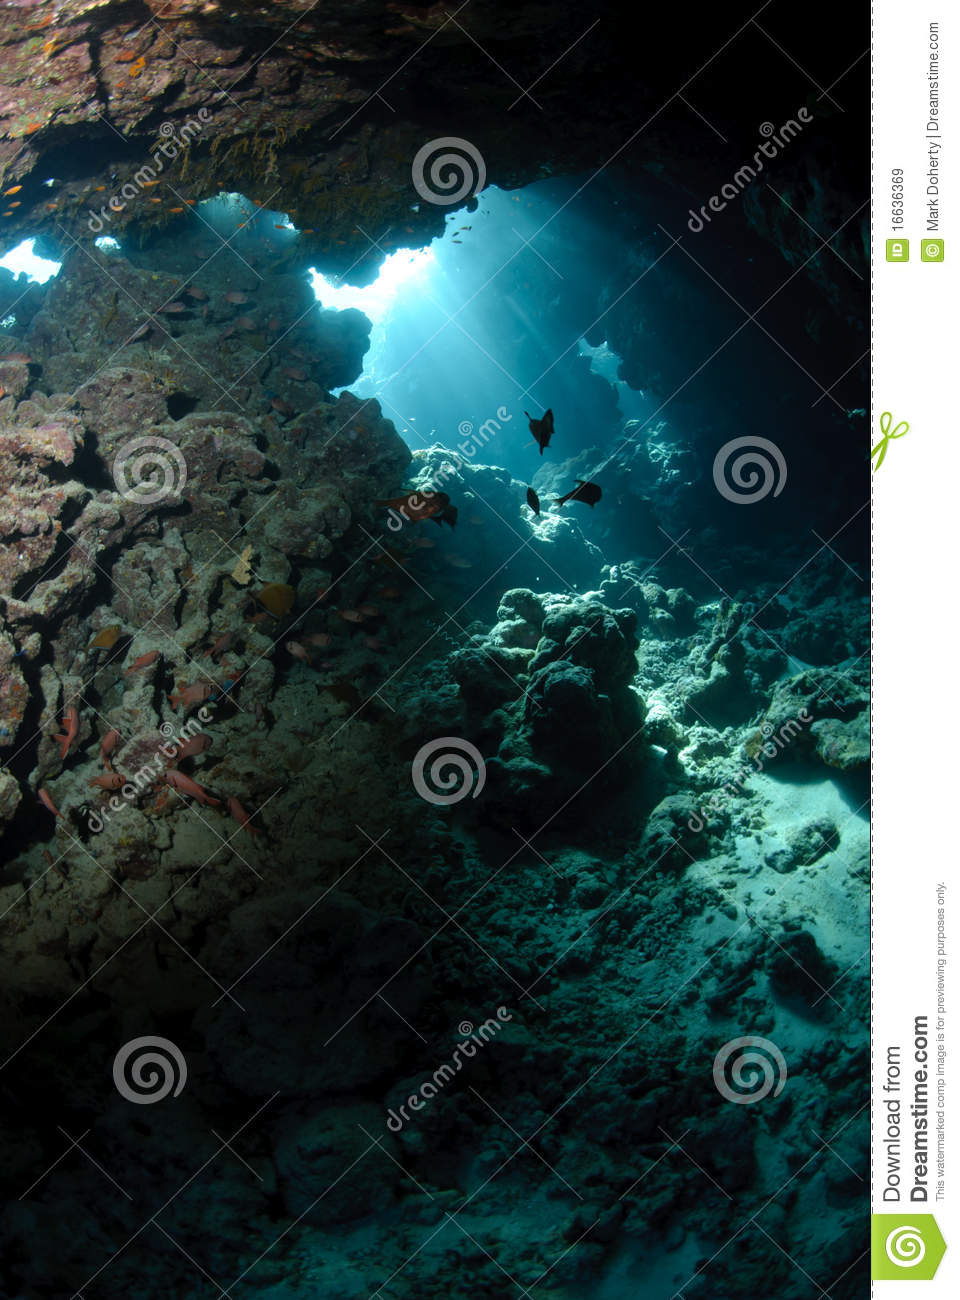 Underwater Cave And Sunlight Royalty Free Stock Images   Image